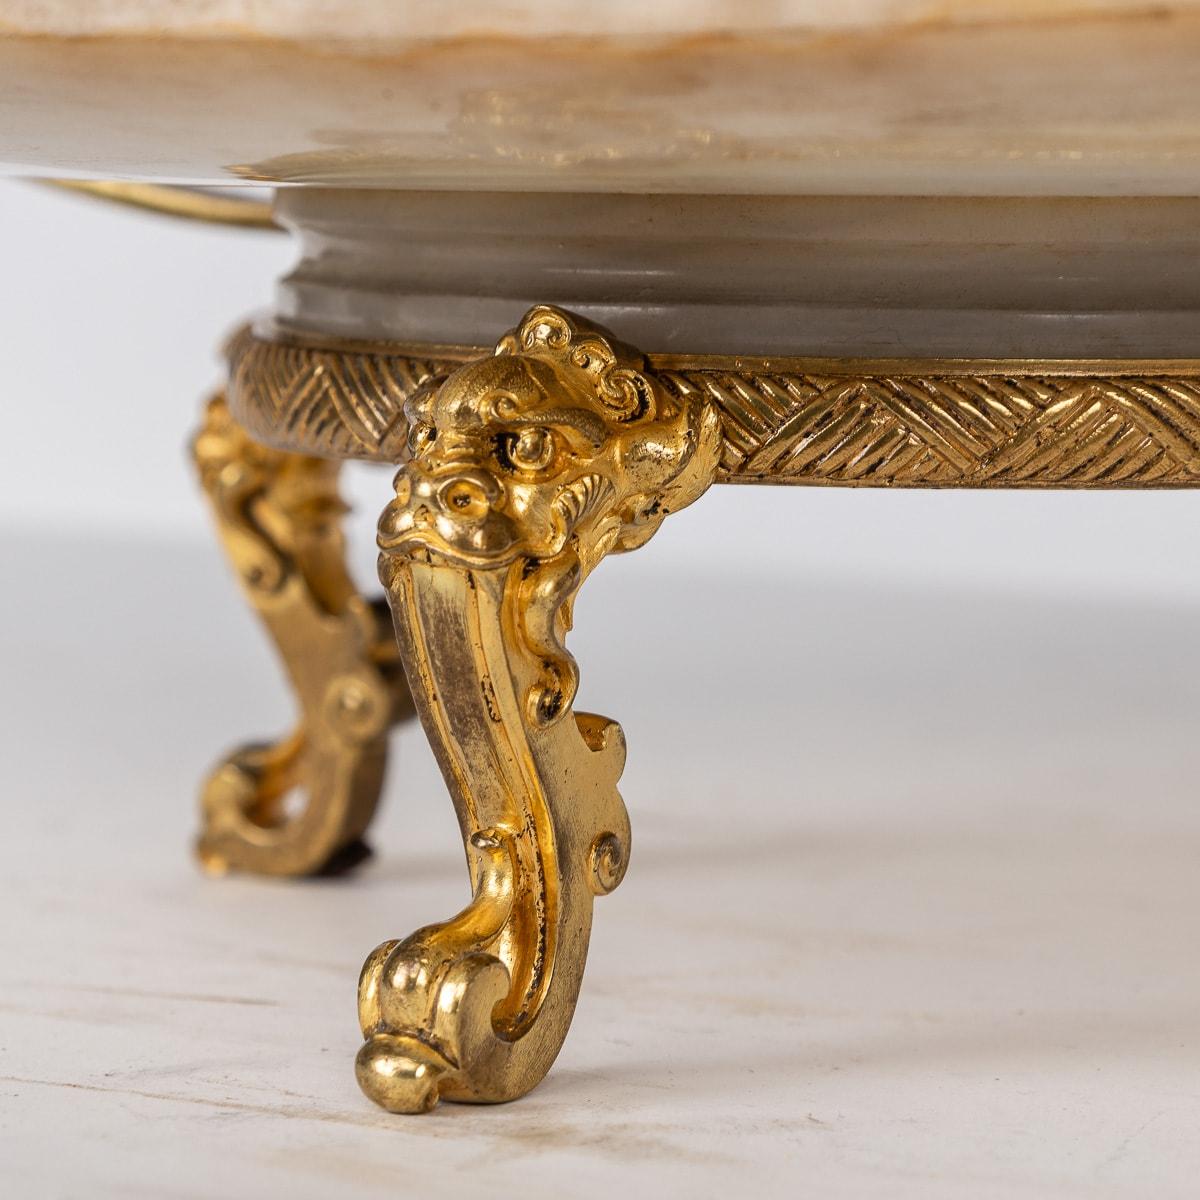 19th Century French Ormolu Mounted Onyx Marble & Enamel Centrepiece c.1880 For Sale 12